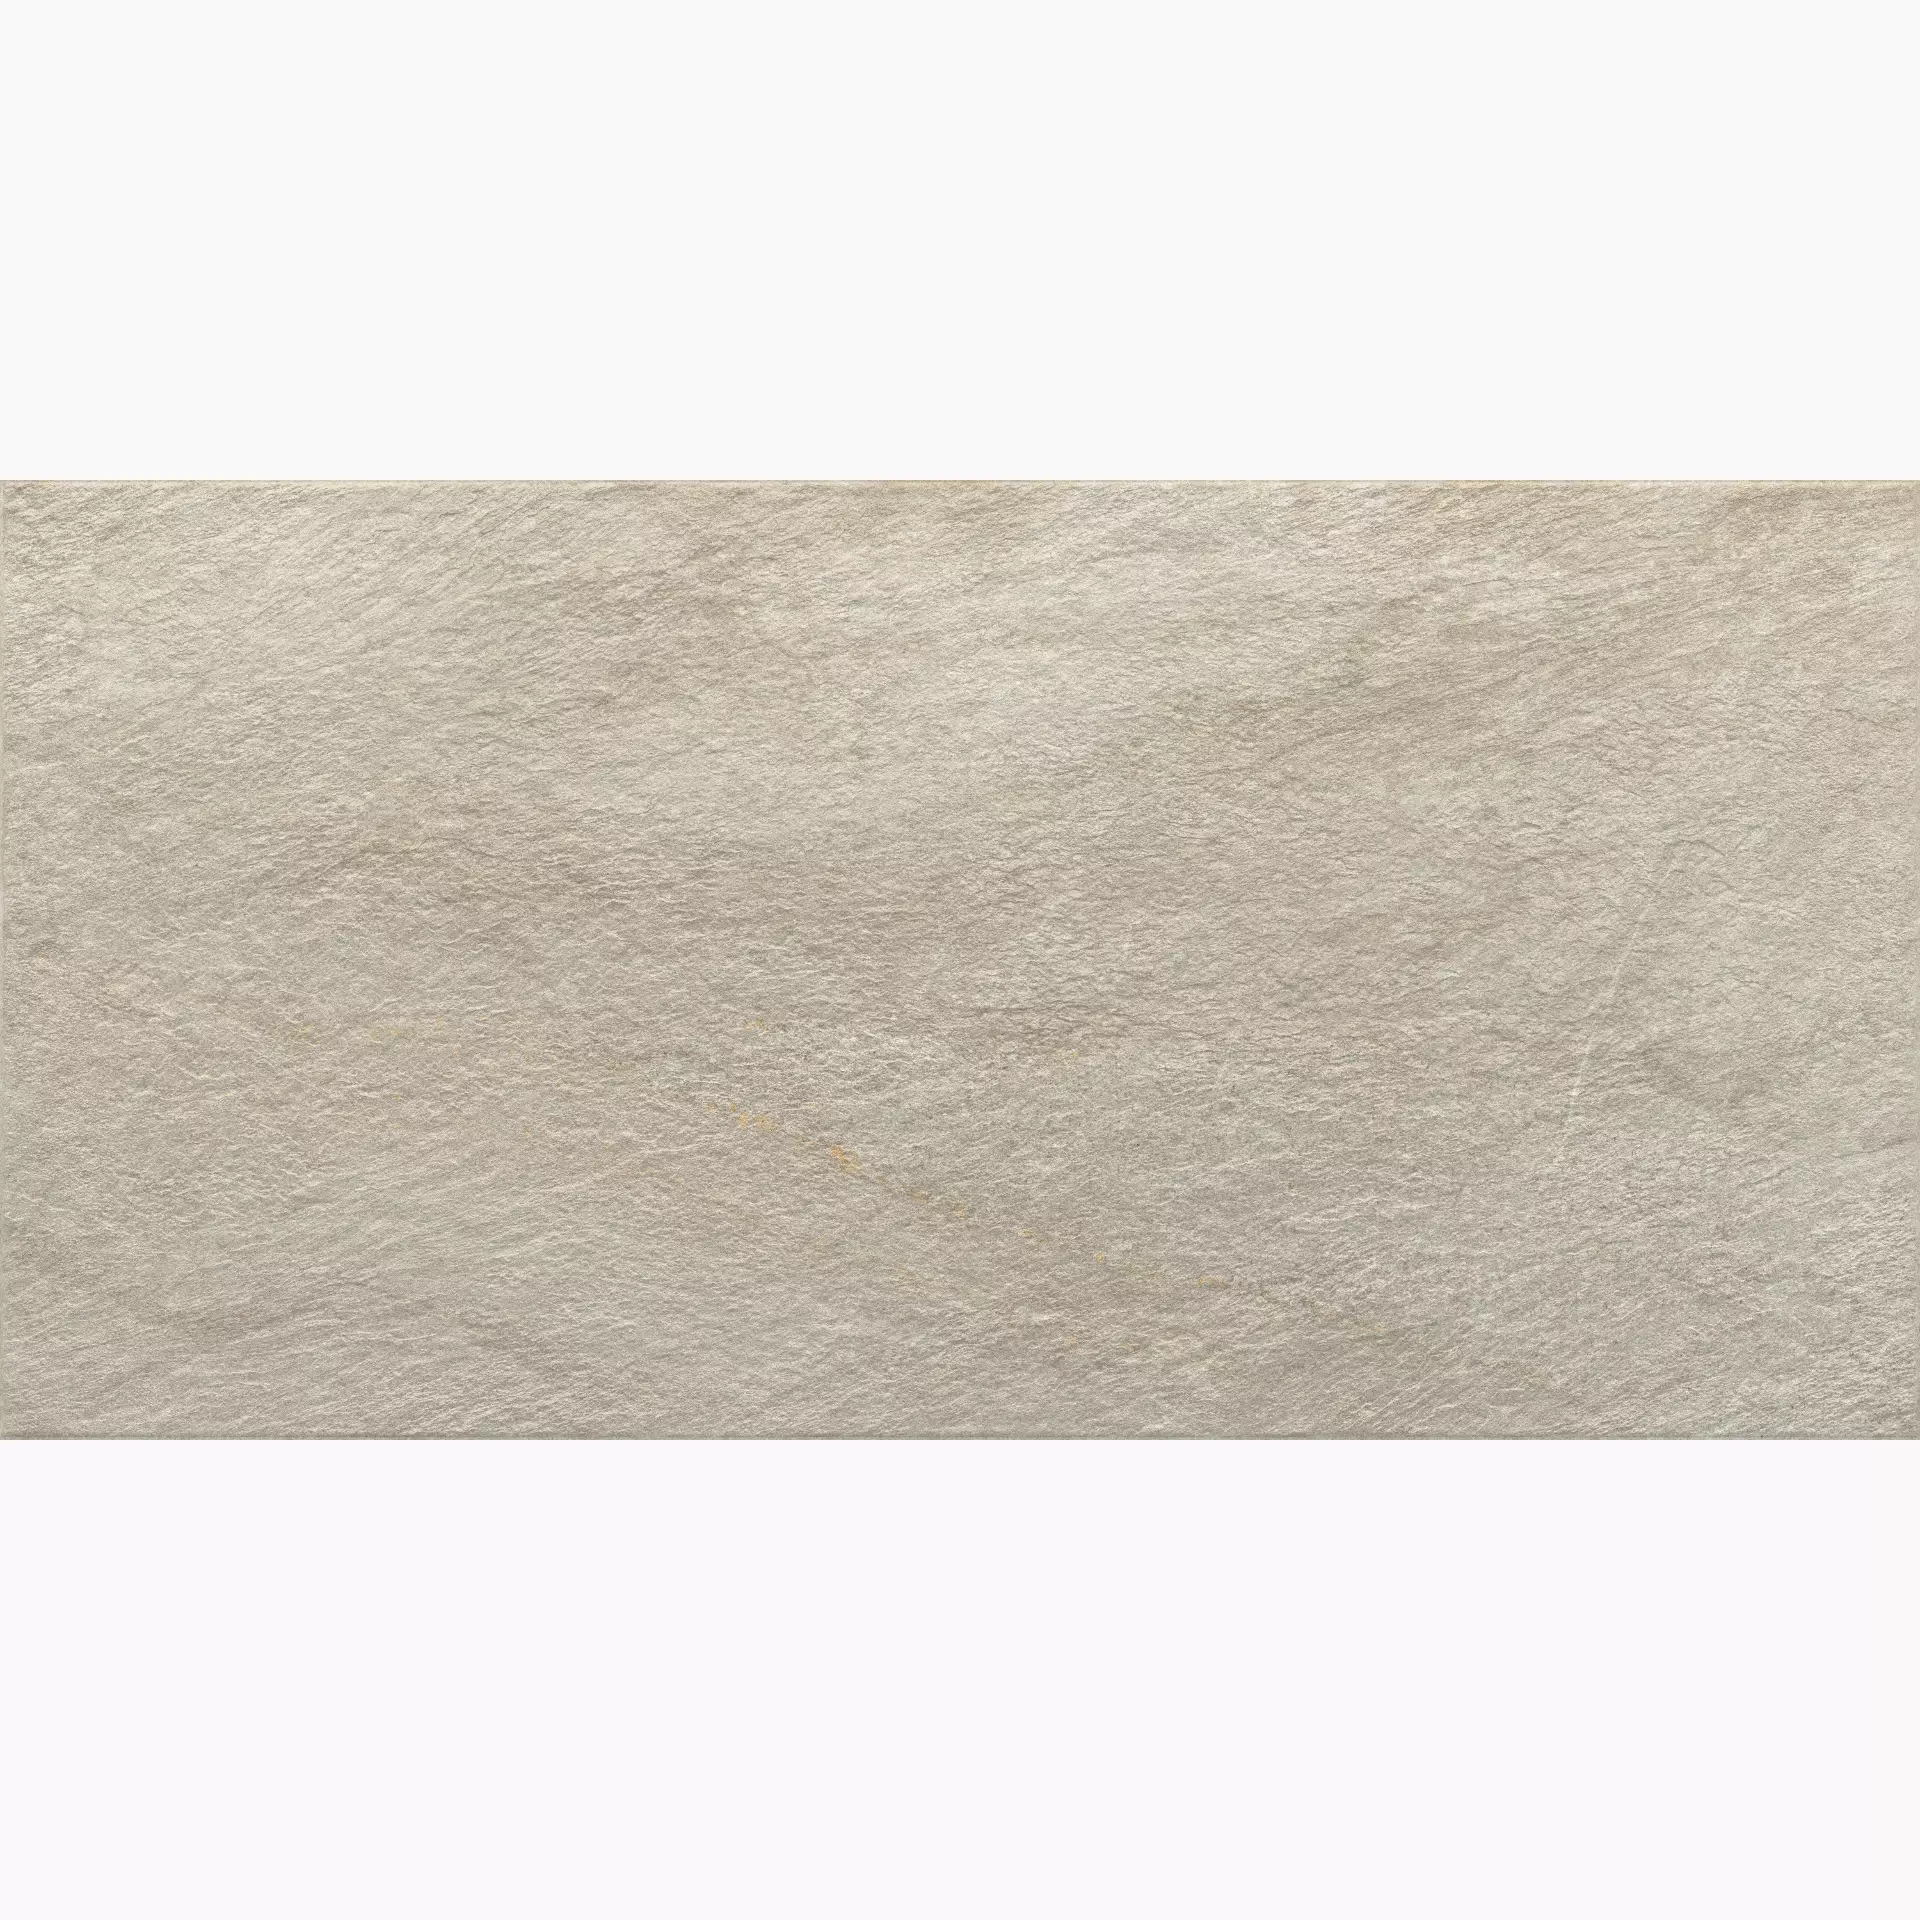 Panaria The Place County Beige Antibacterial - Strutturato PGXP960 60x120cm rectified 20mm